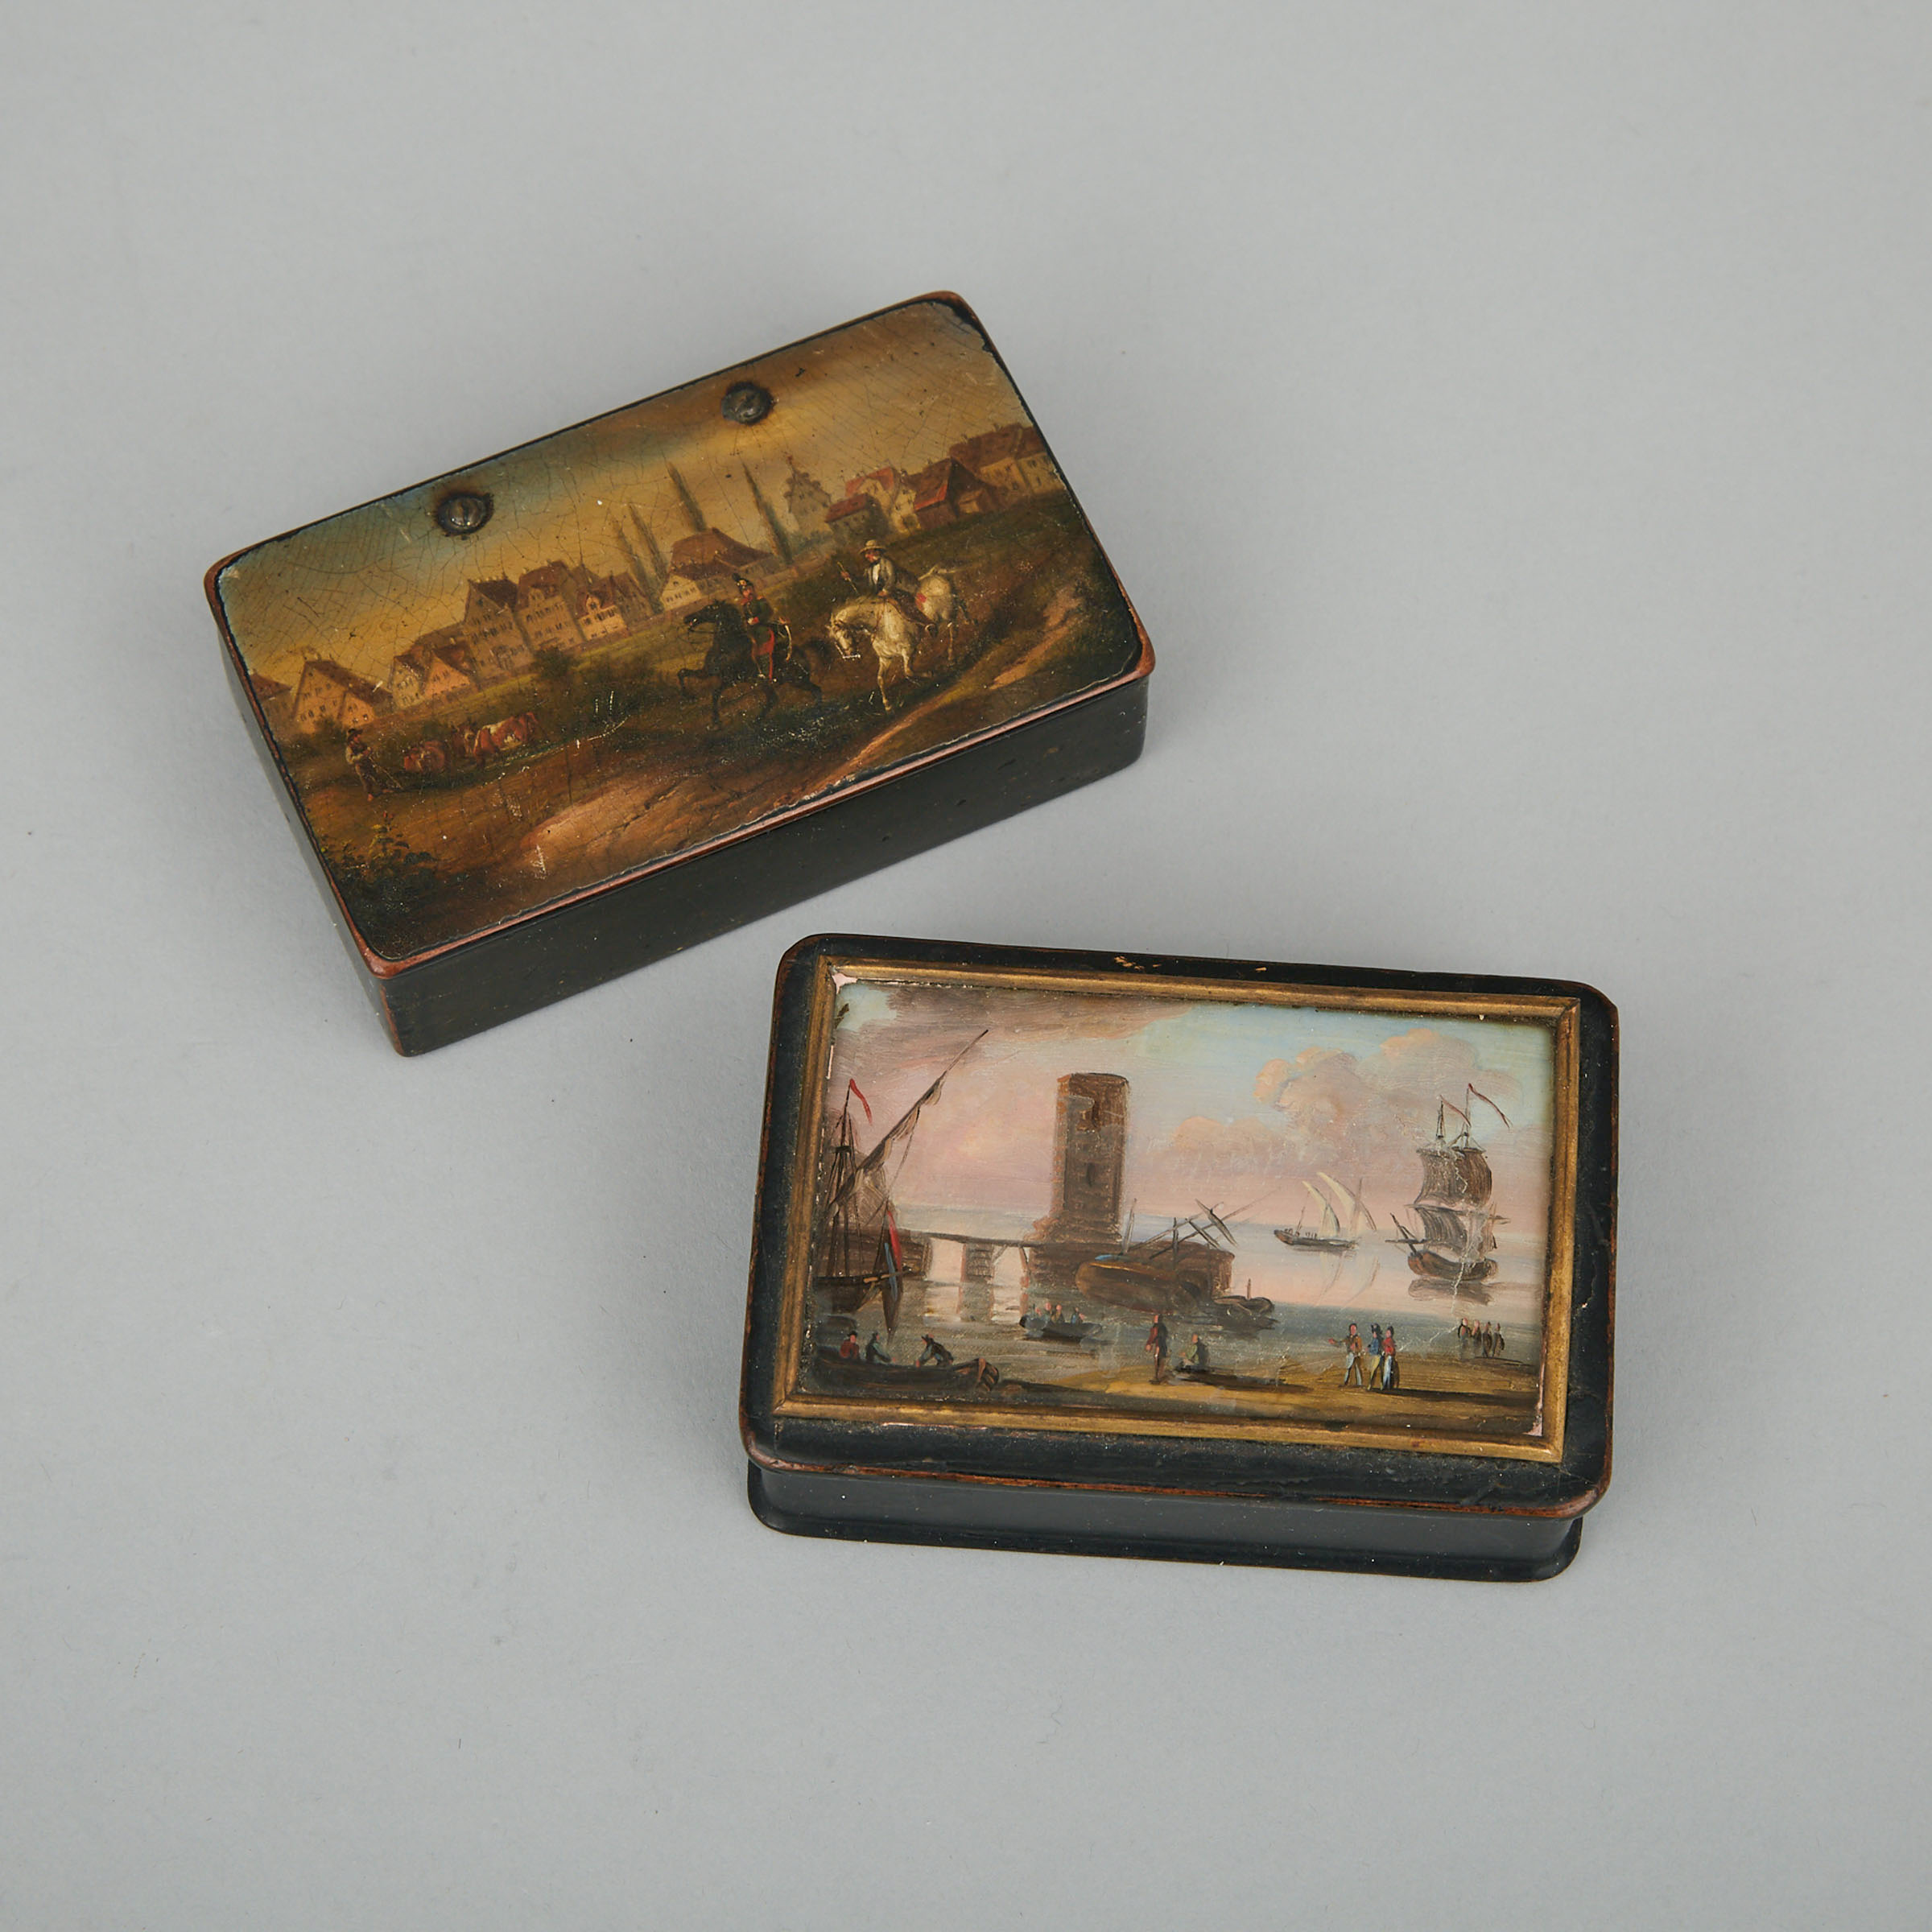 Two Continental Papier Maché Snuff Boxes, early 19th century